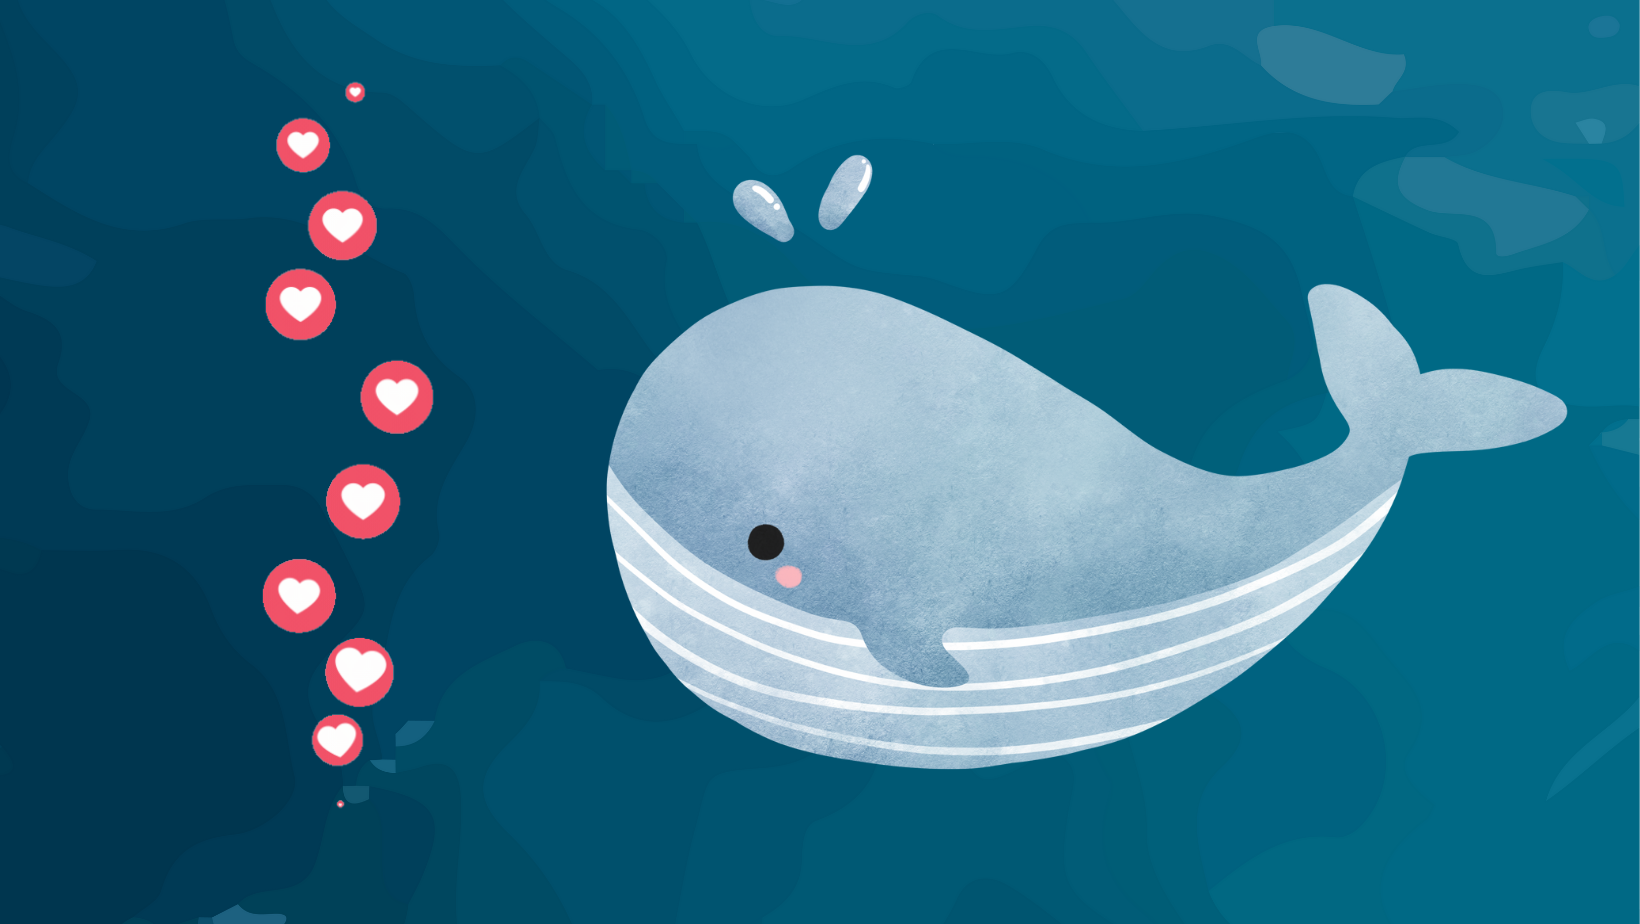 A whale in a blue ocean with red heart bubbles. 